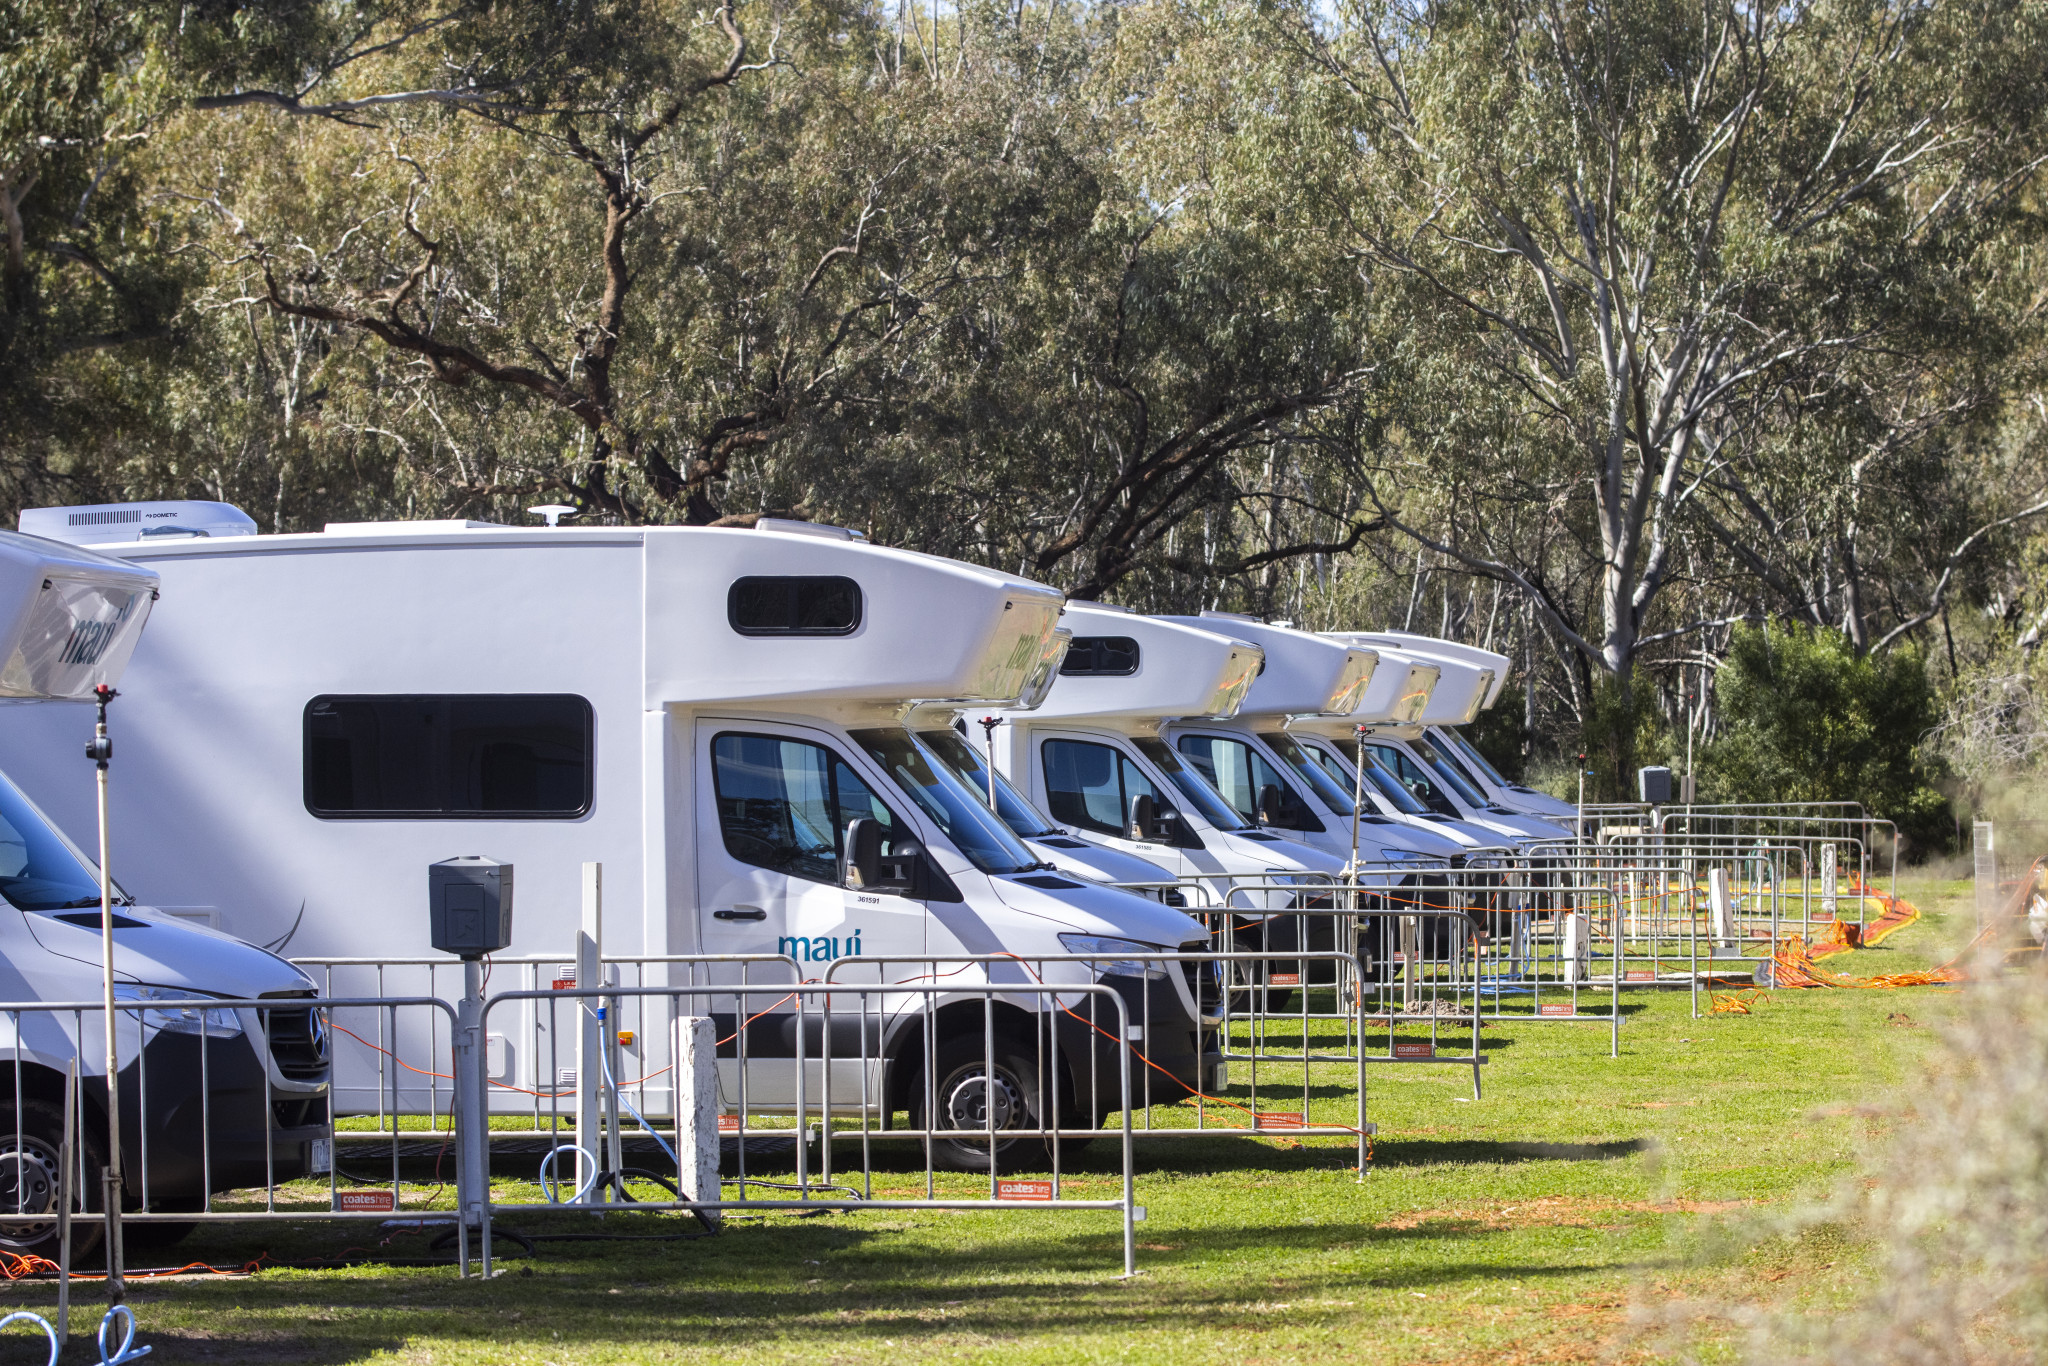 Industry claims caravans could solve Victoria 2026 accommodation shortages